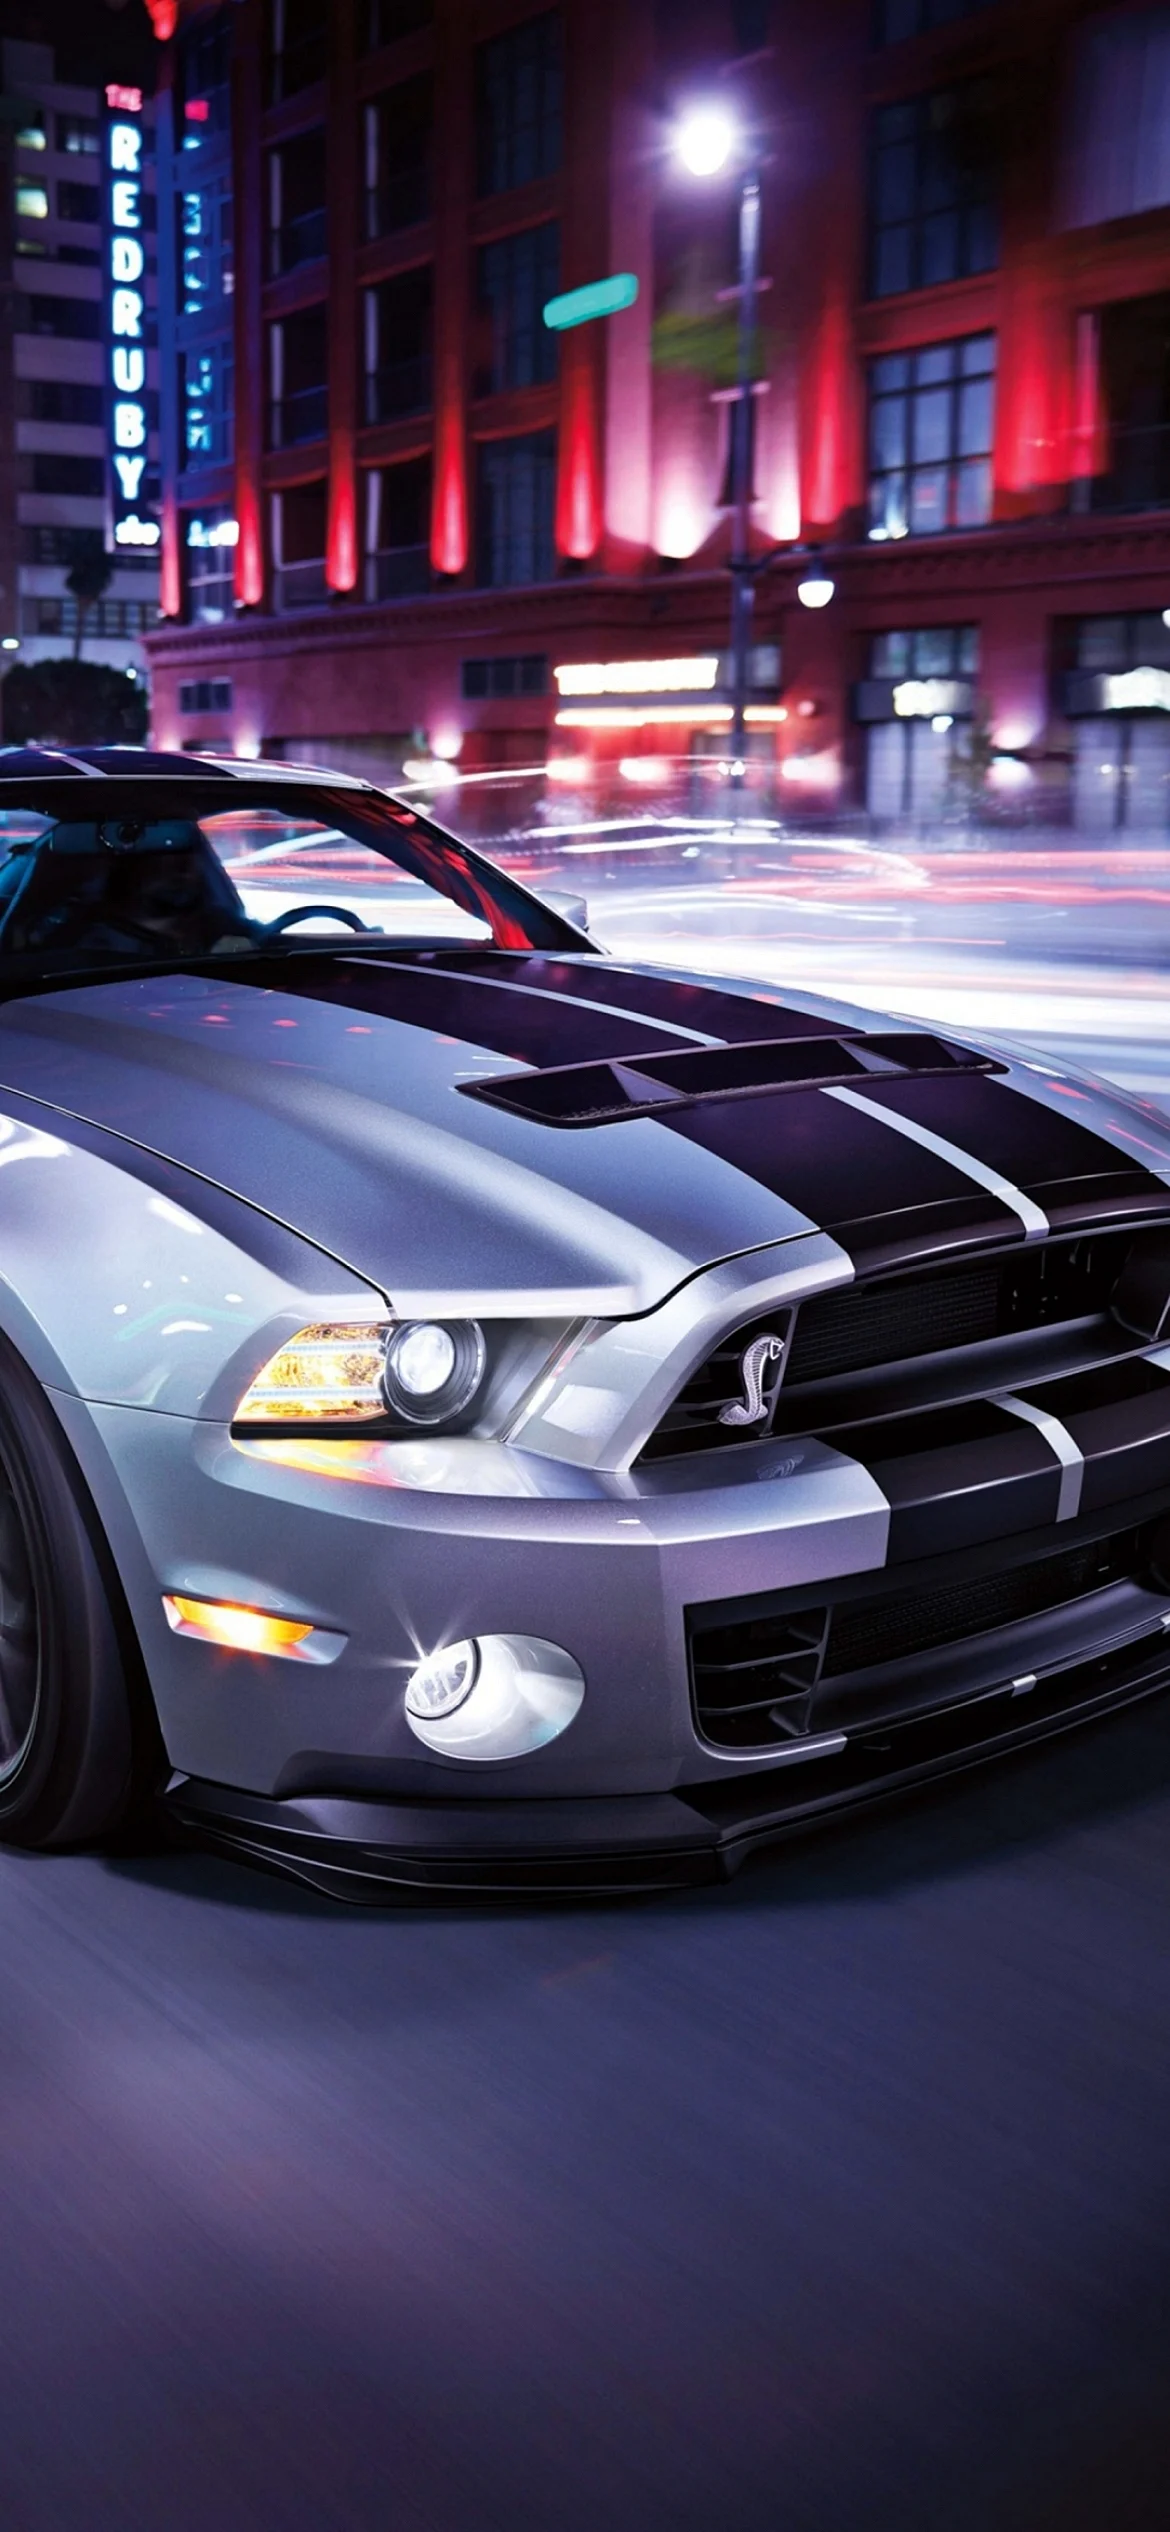 Ford Shelby Gt500 Wallpaper for iPhone 12 Pro